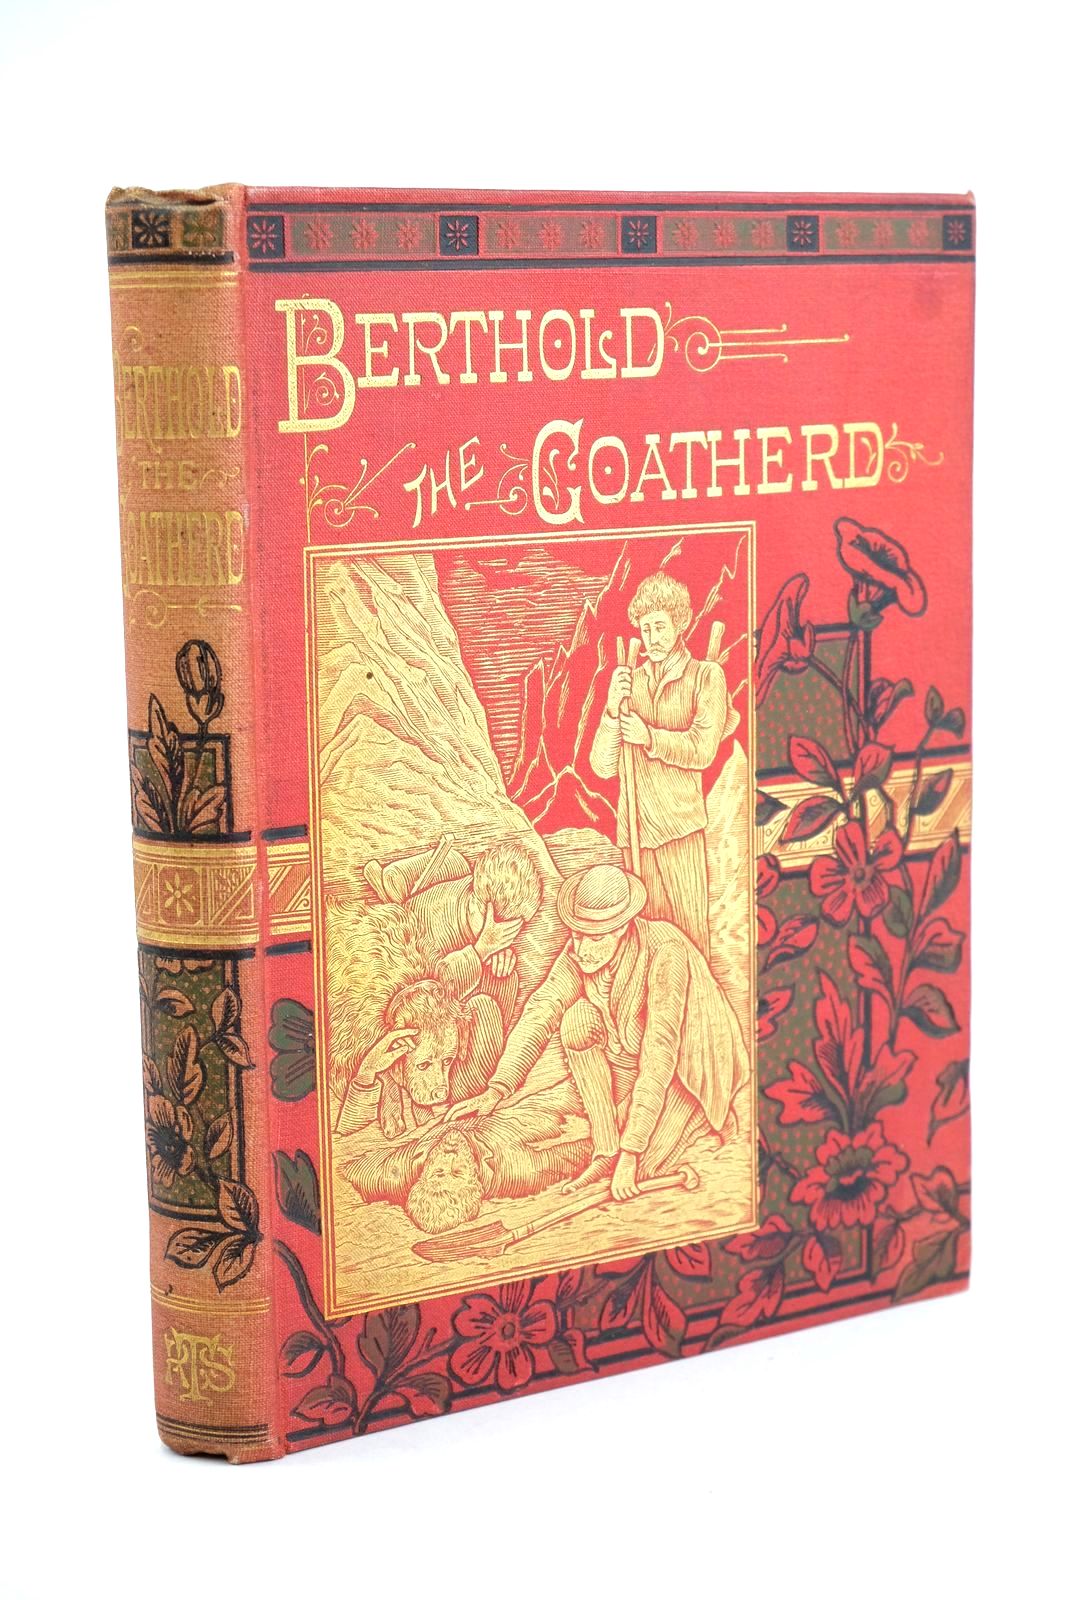 Photo of BERTHOLD THE GOATHERD written by Filleul, Marianne illustrated by Stacey, W.S. published by The Religious Tract Society (STOCK CODE: 1323818)  for sale by Stella & Rose's Books